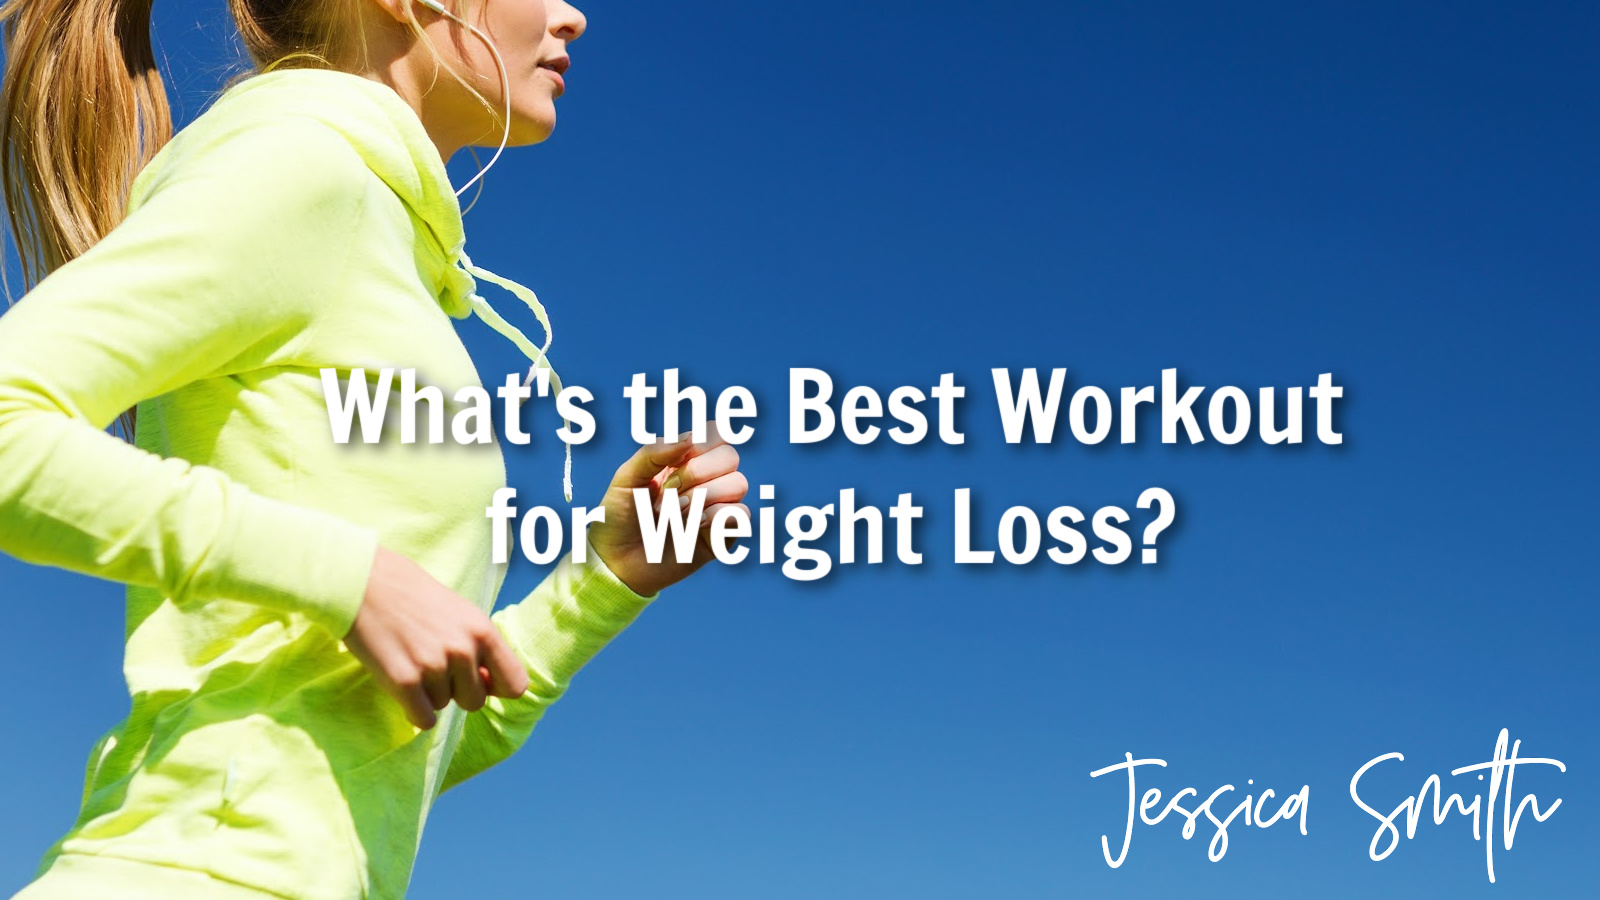 What’s the Best Workout for Weight Loss?